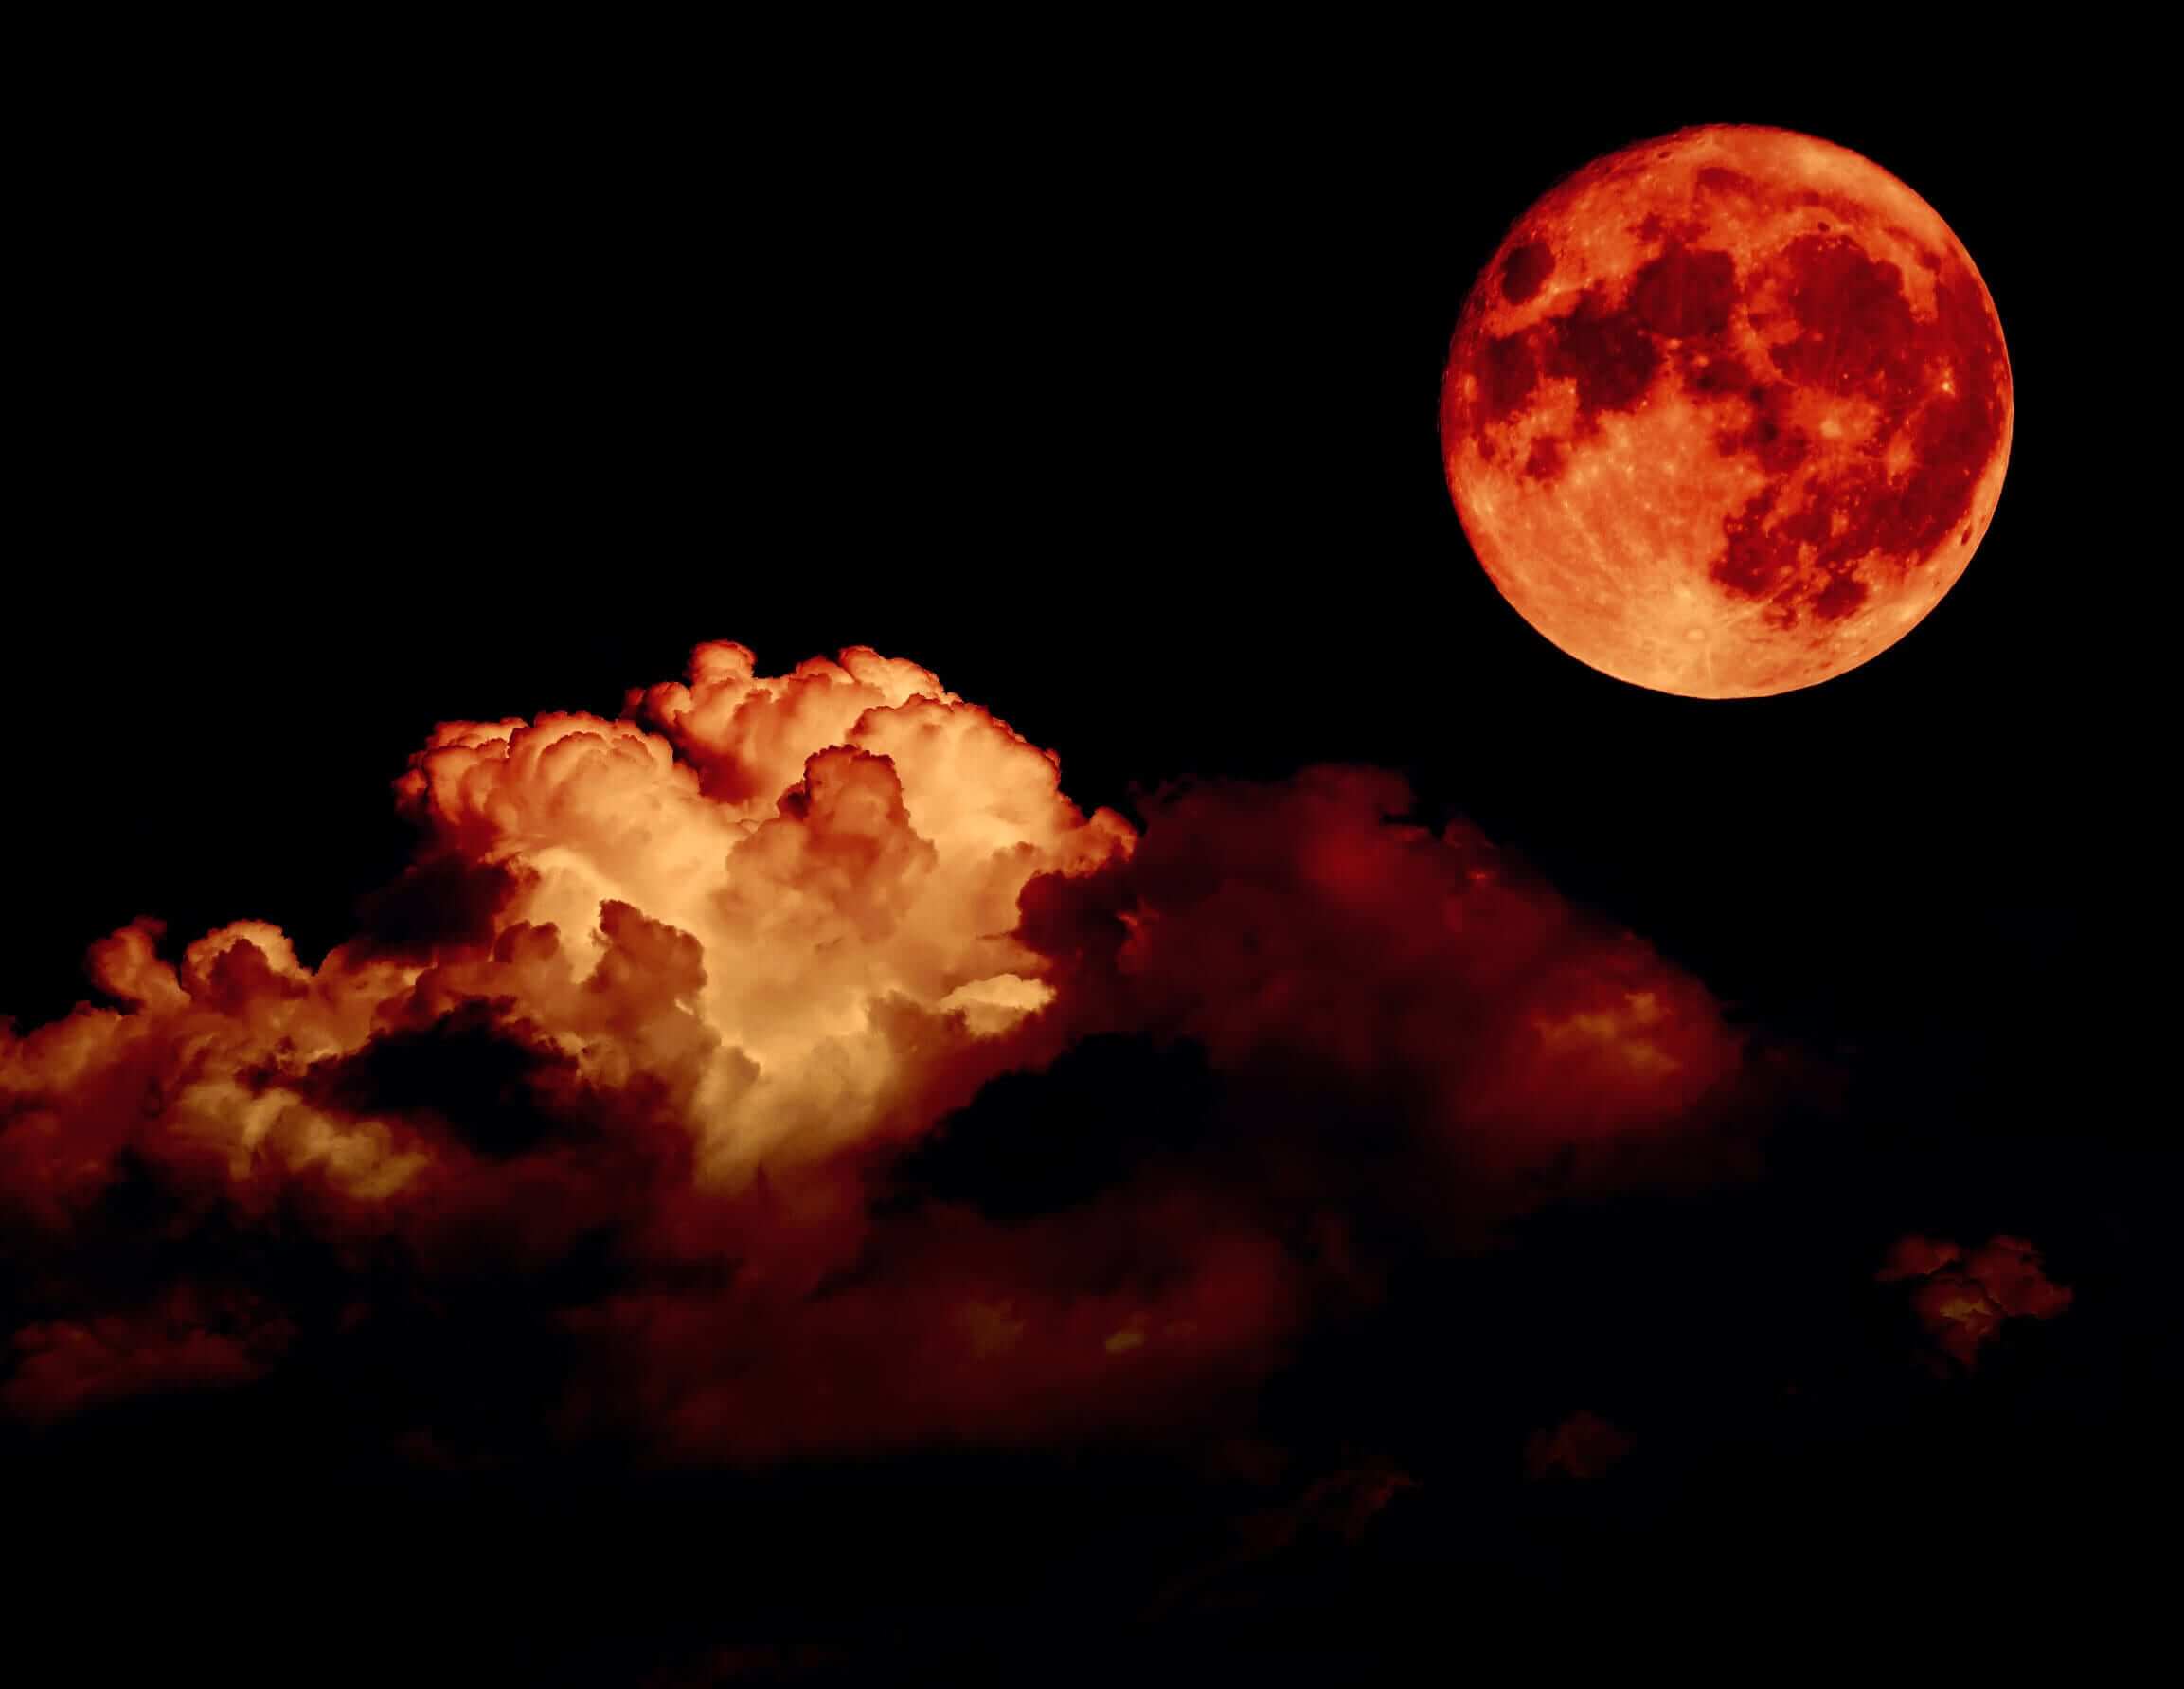 5 Tips to Photograph the Super Blood Moon